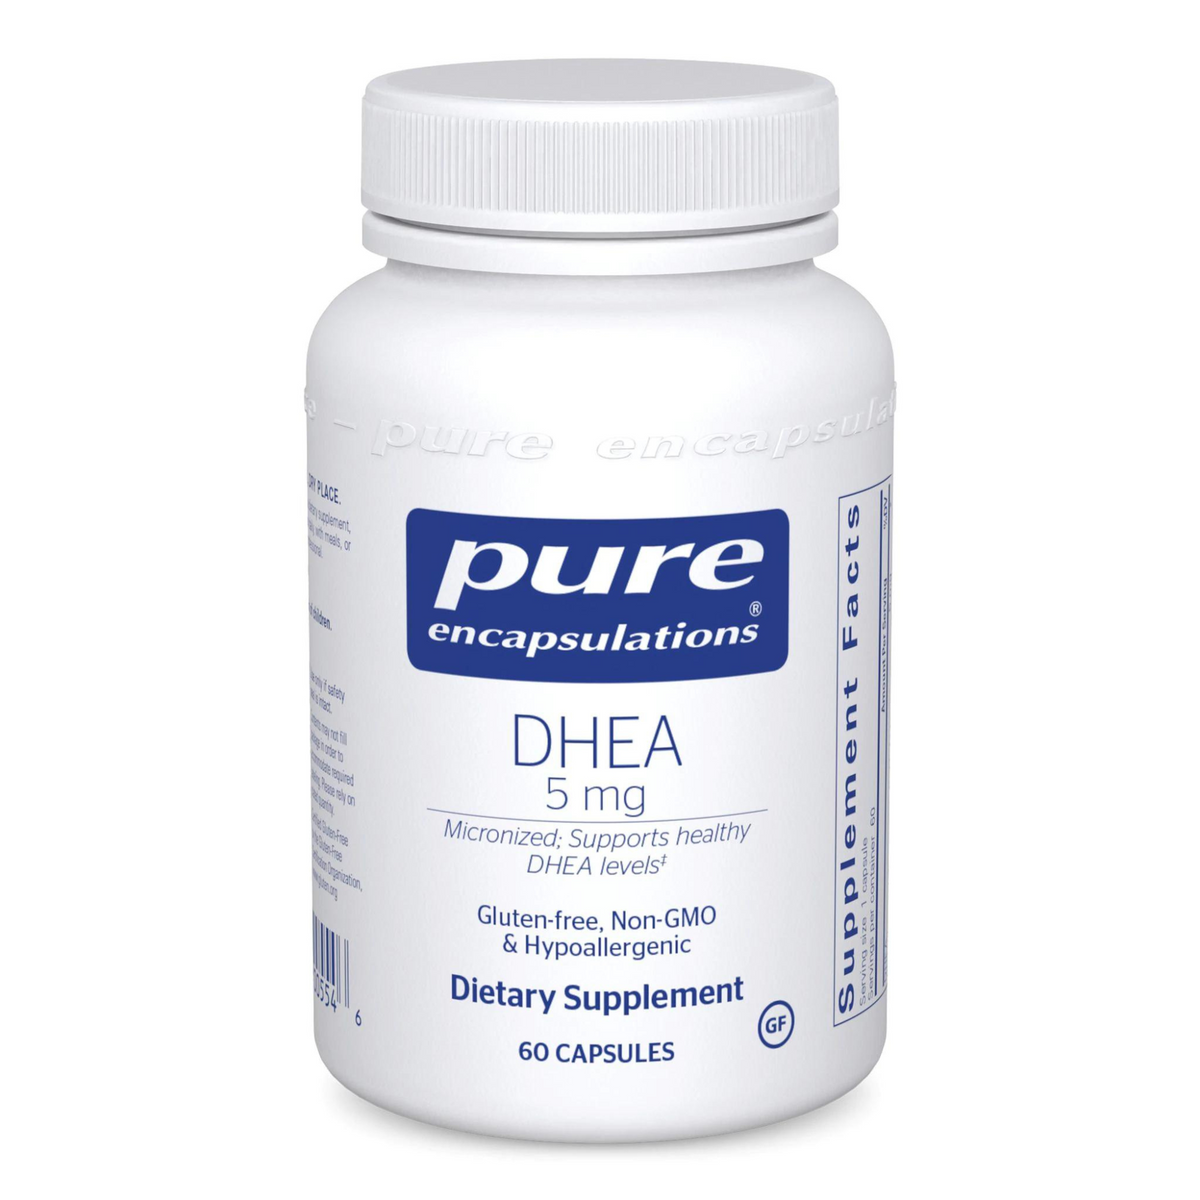 Primary Image of DHEA 5 mg. Capsules (60 count)